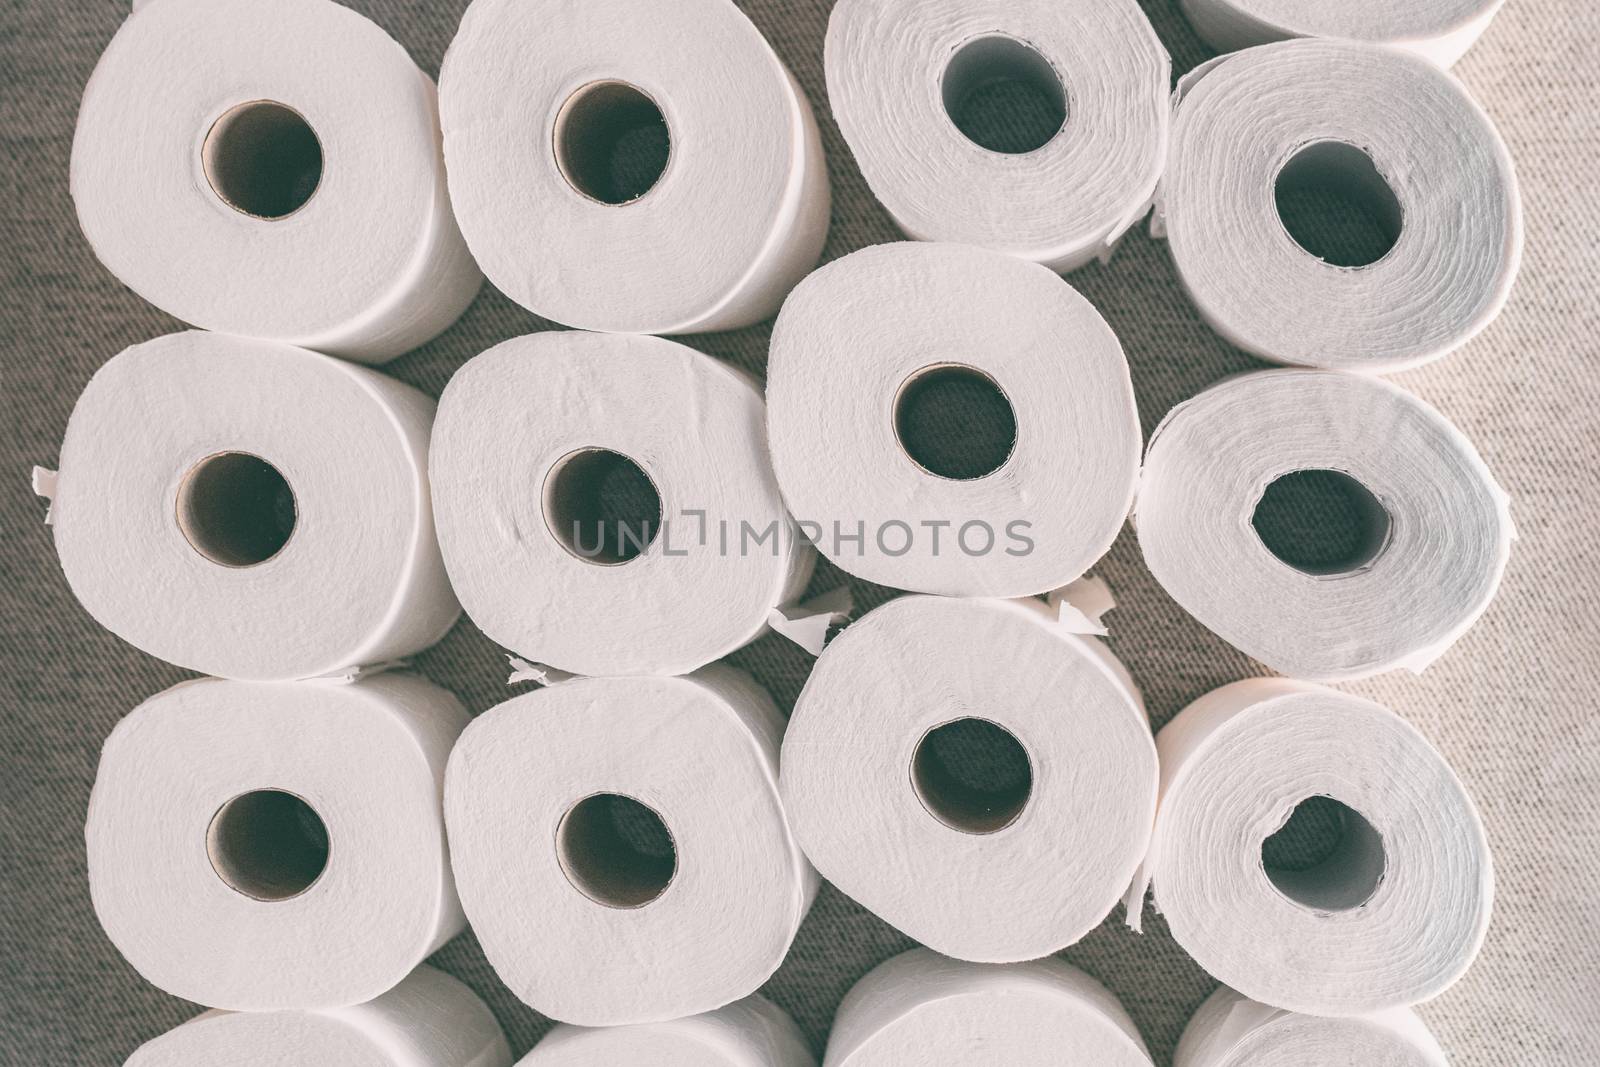 Toilet paper rolls background top flat view of many open rolls. Hoarding of bathroom tissues in fear of store supply shortage during coronavirus COVID-19 panic buying.